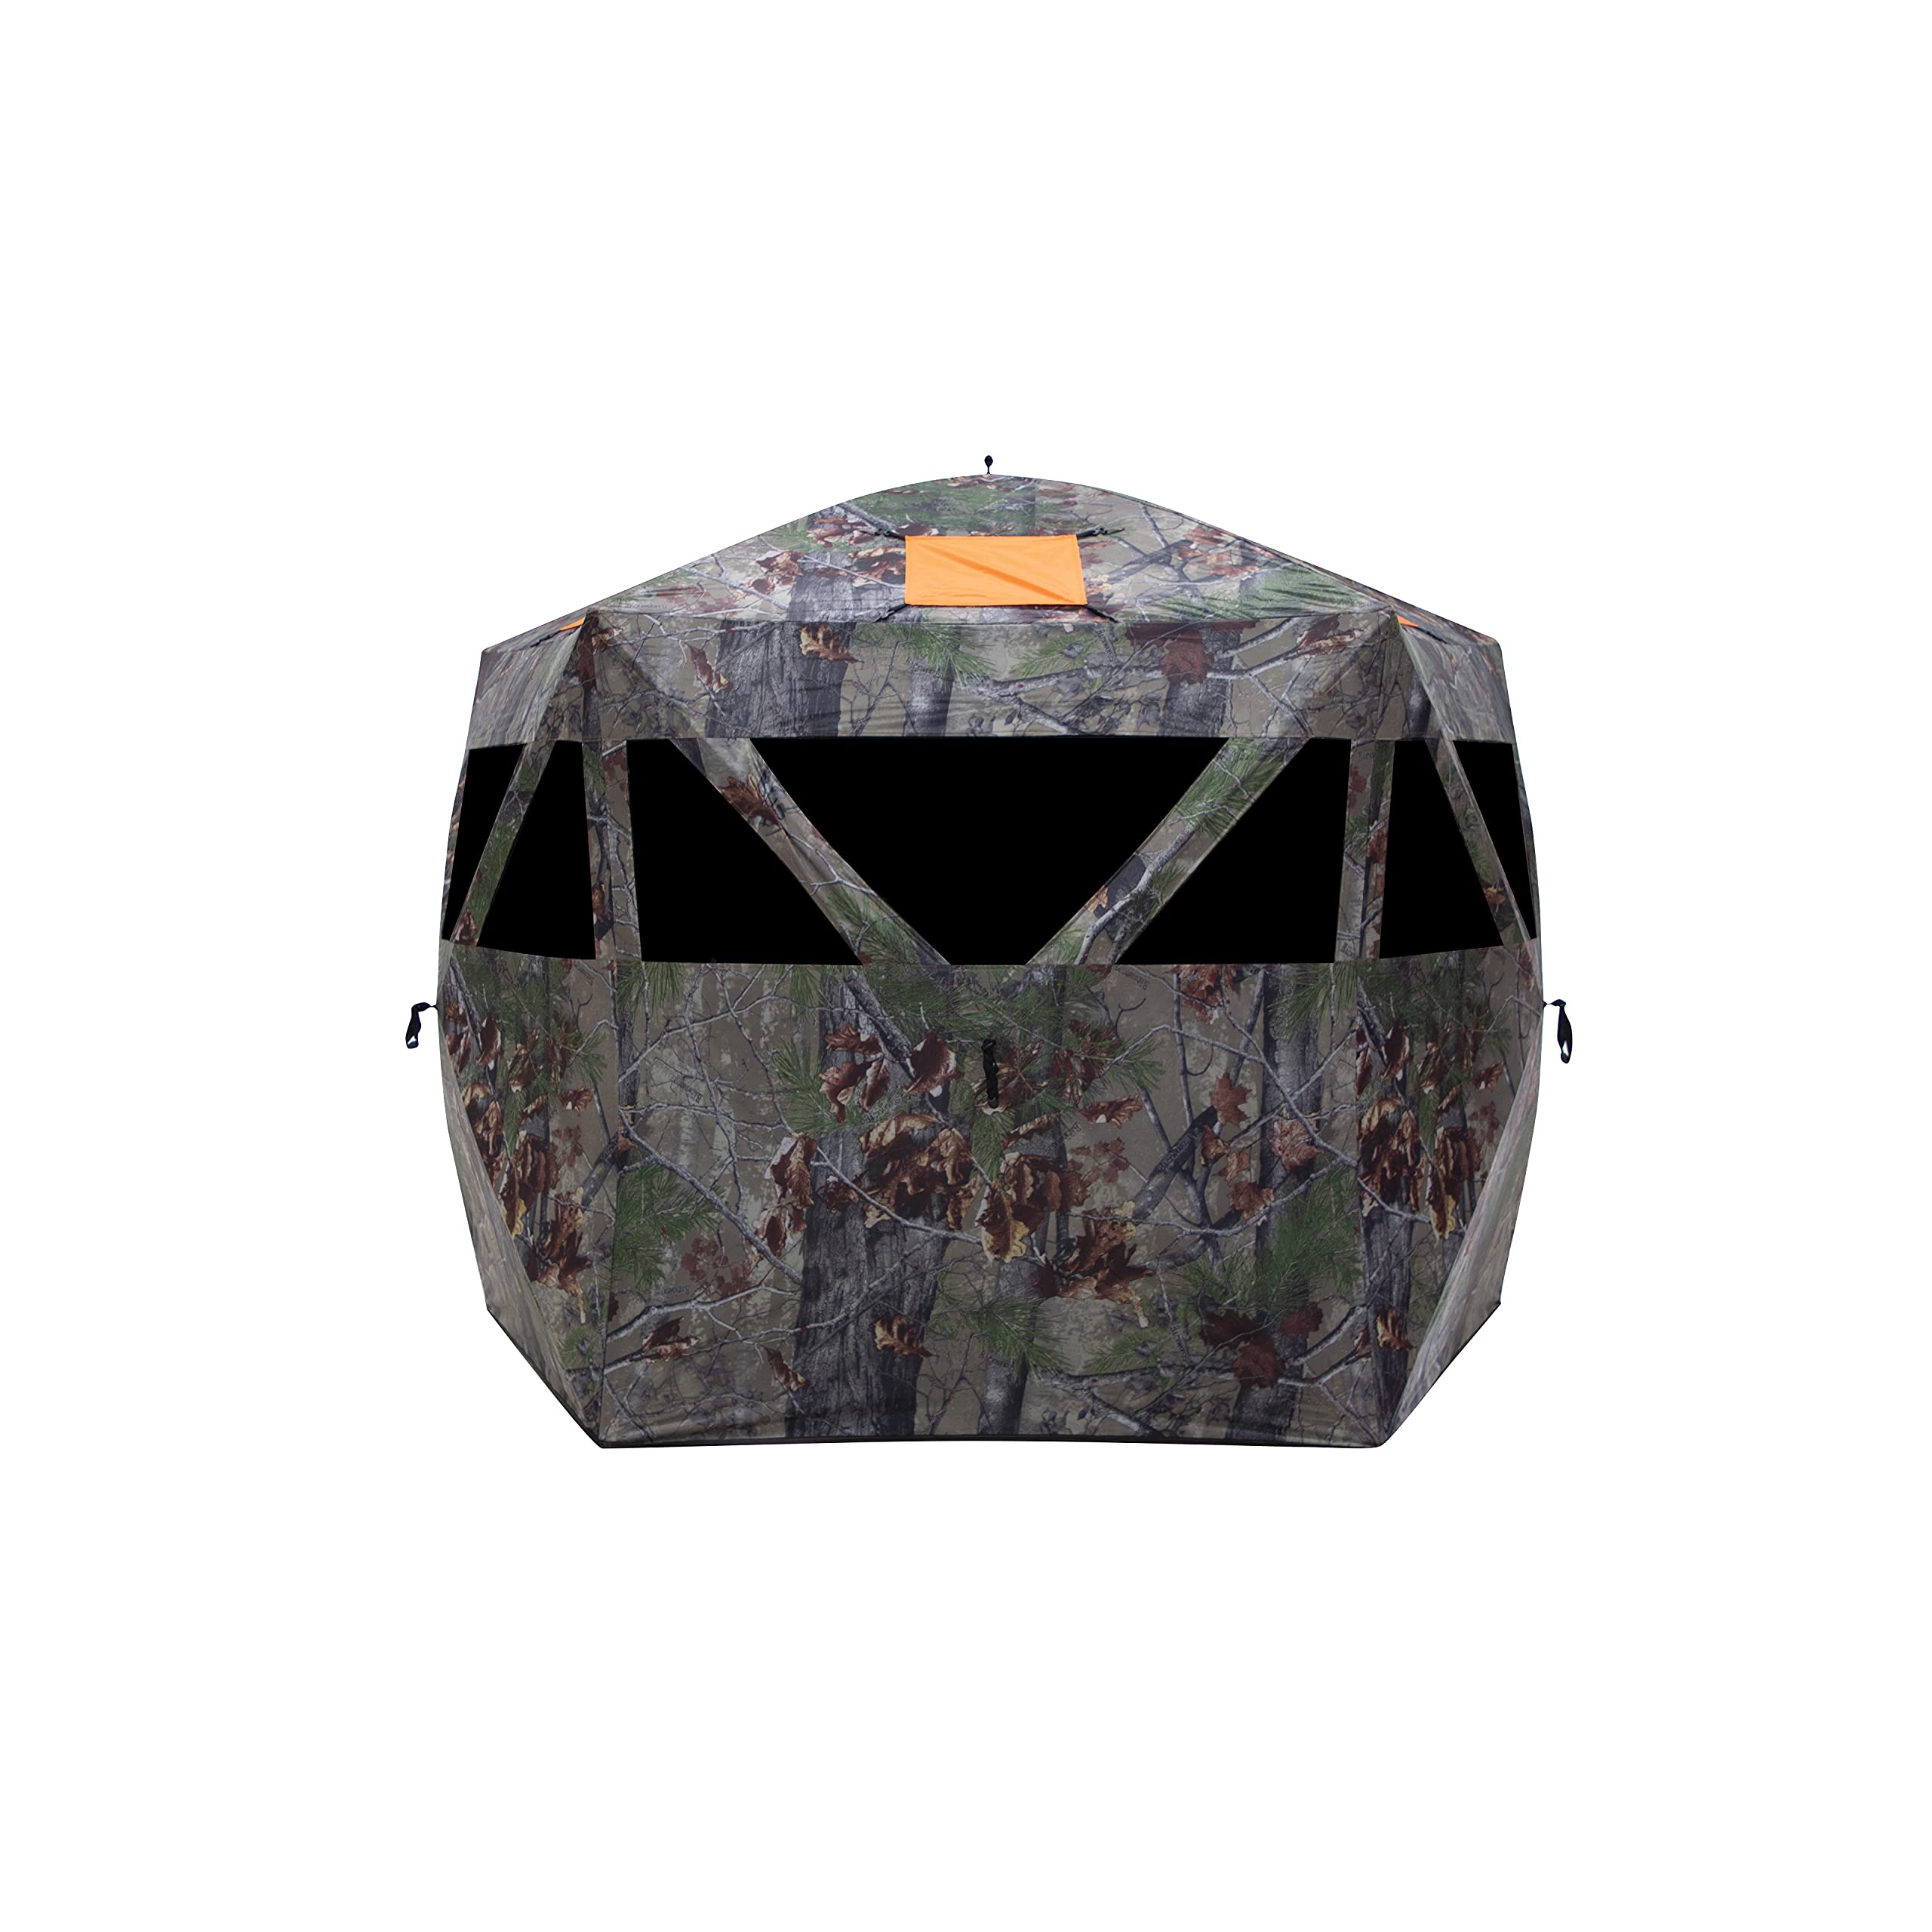 Barronett Blinds® Feather Five, Portable Hunting Blind, Huge Interior, Lightweight, 4-Person, Bloodtrail® Backwoods, 72” x 84” x 84”, FF500BW